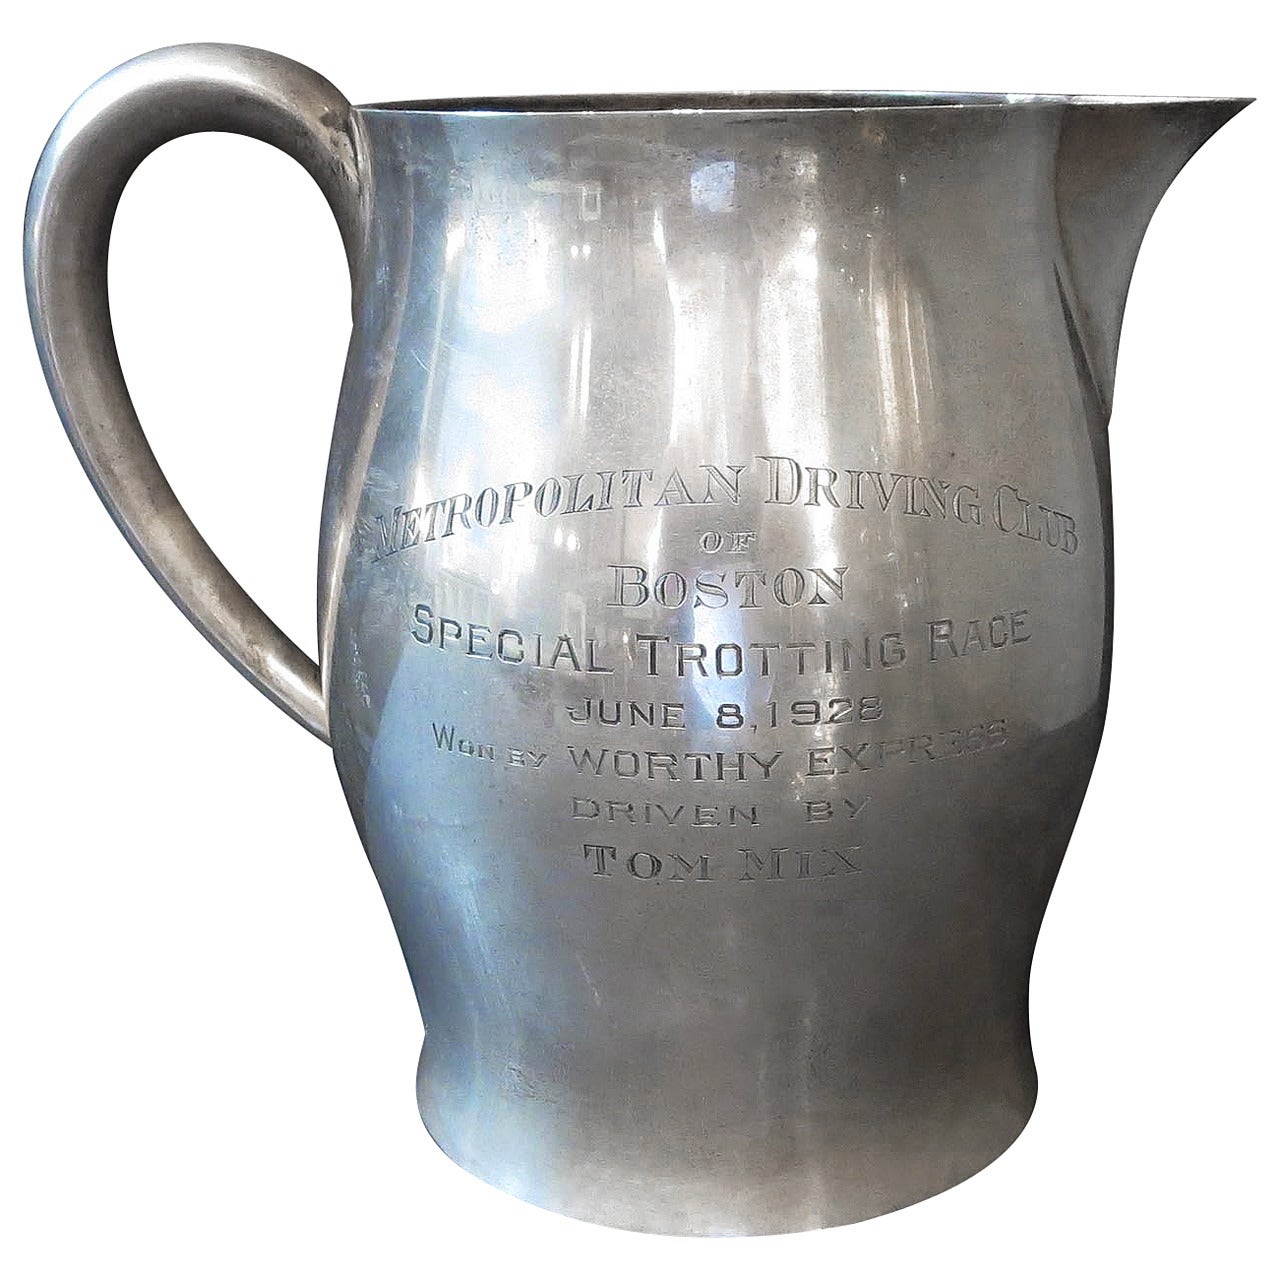 Tom Mix Sterling Pitcher from Metropolitan Driving Club, Boston 1928